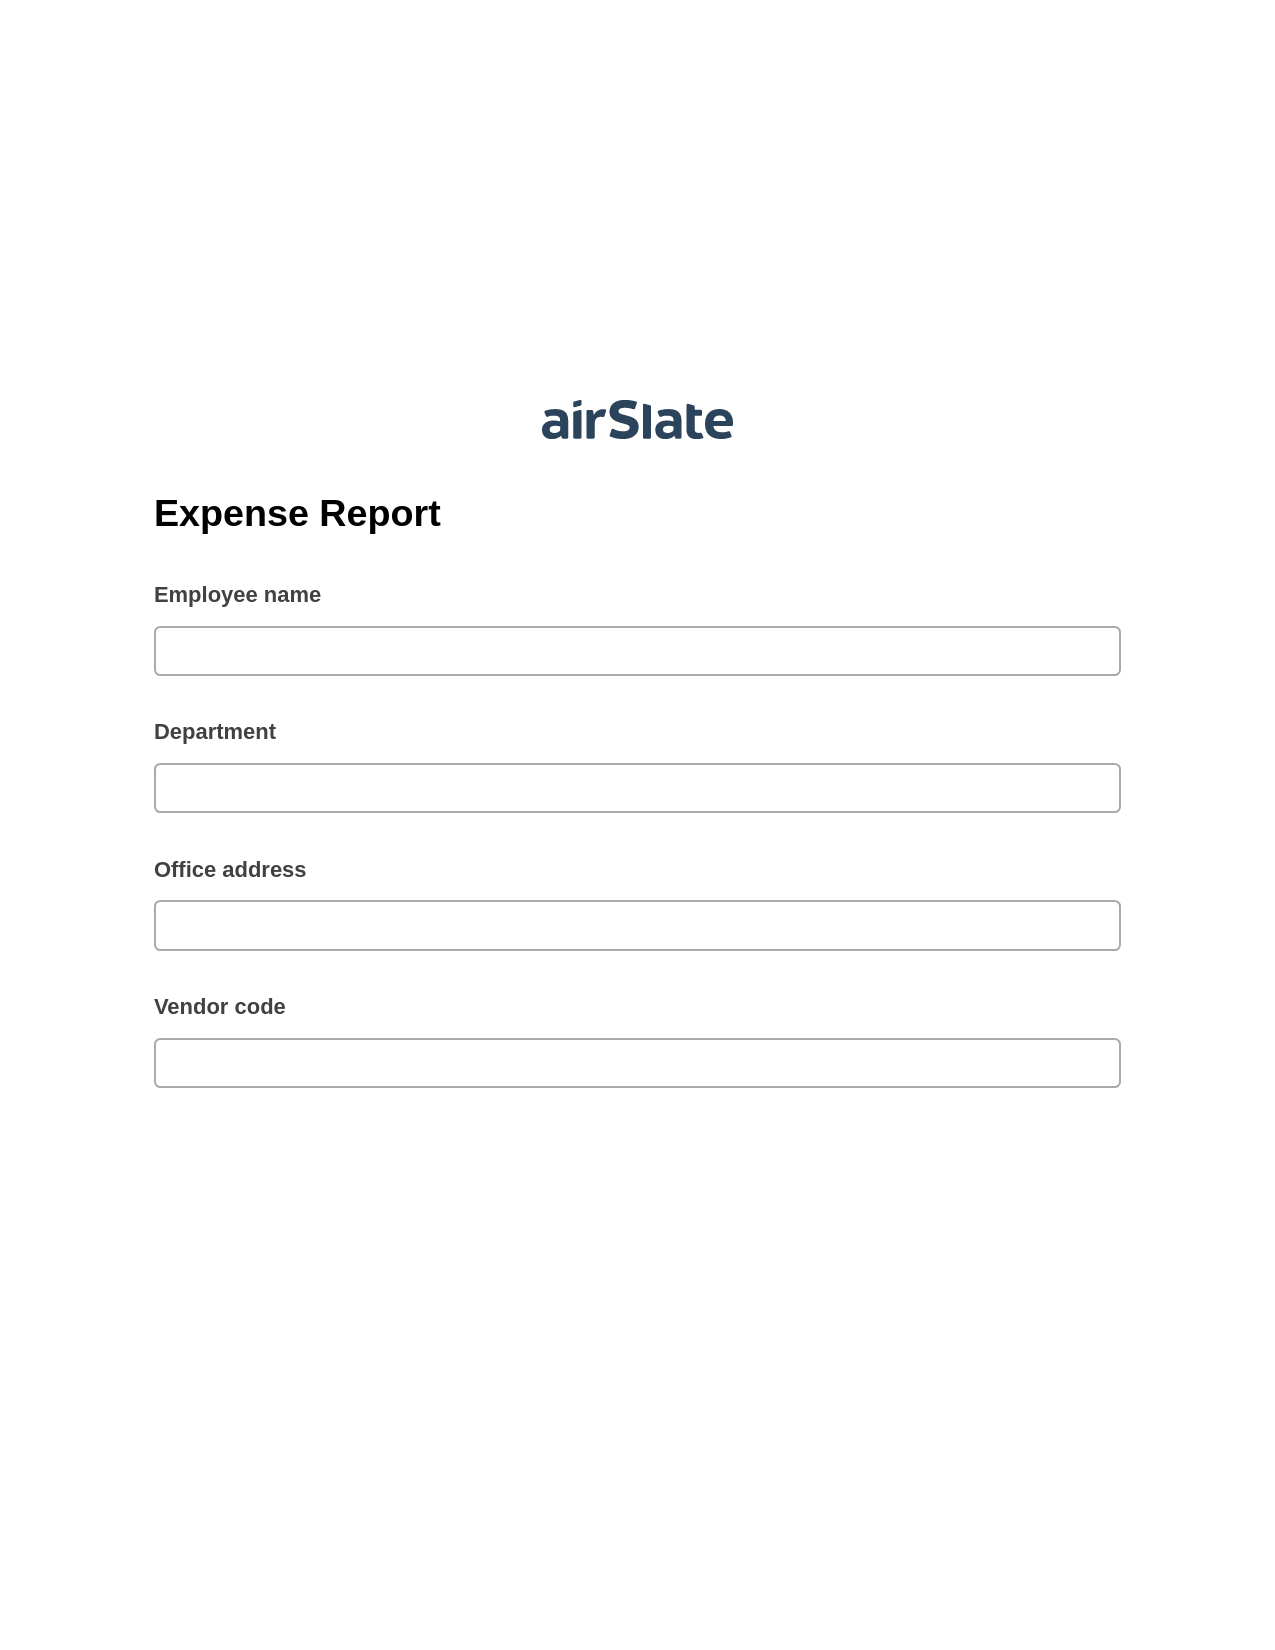 Multirole Expense Report Pre-fill Slate from MS Dynamics 365 Records Bot, Create MS Dynamics 365 Records Bot, Google Drive Bot